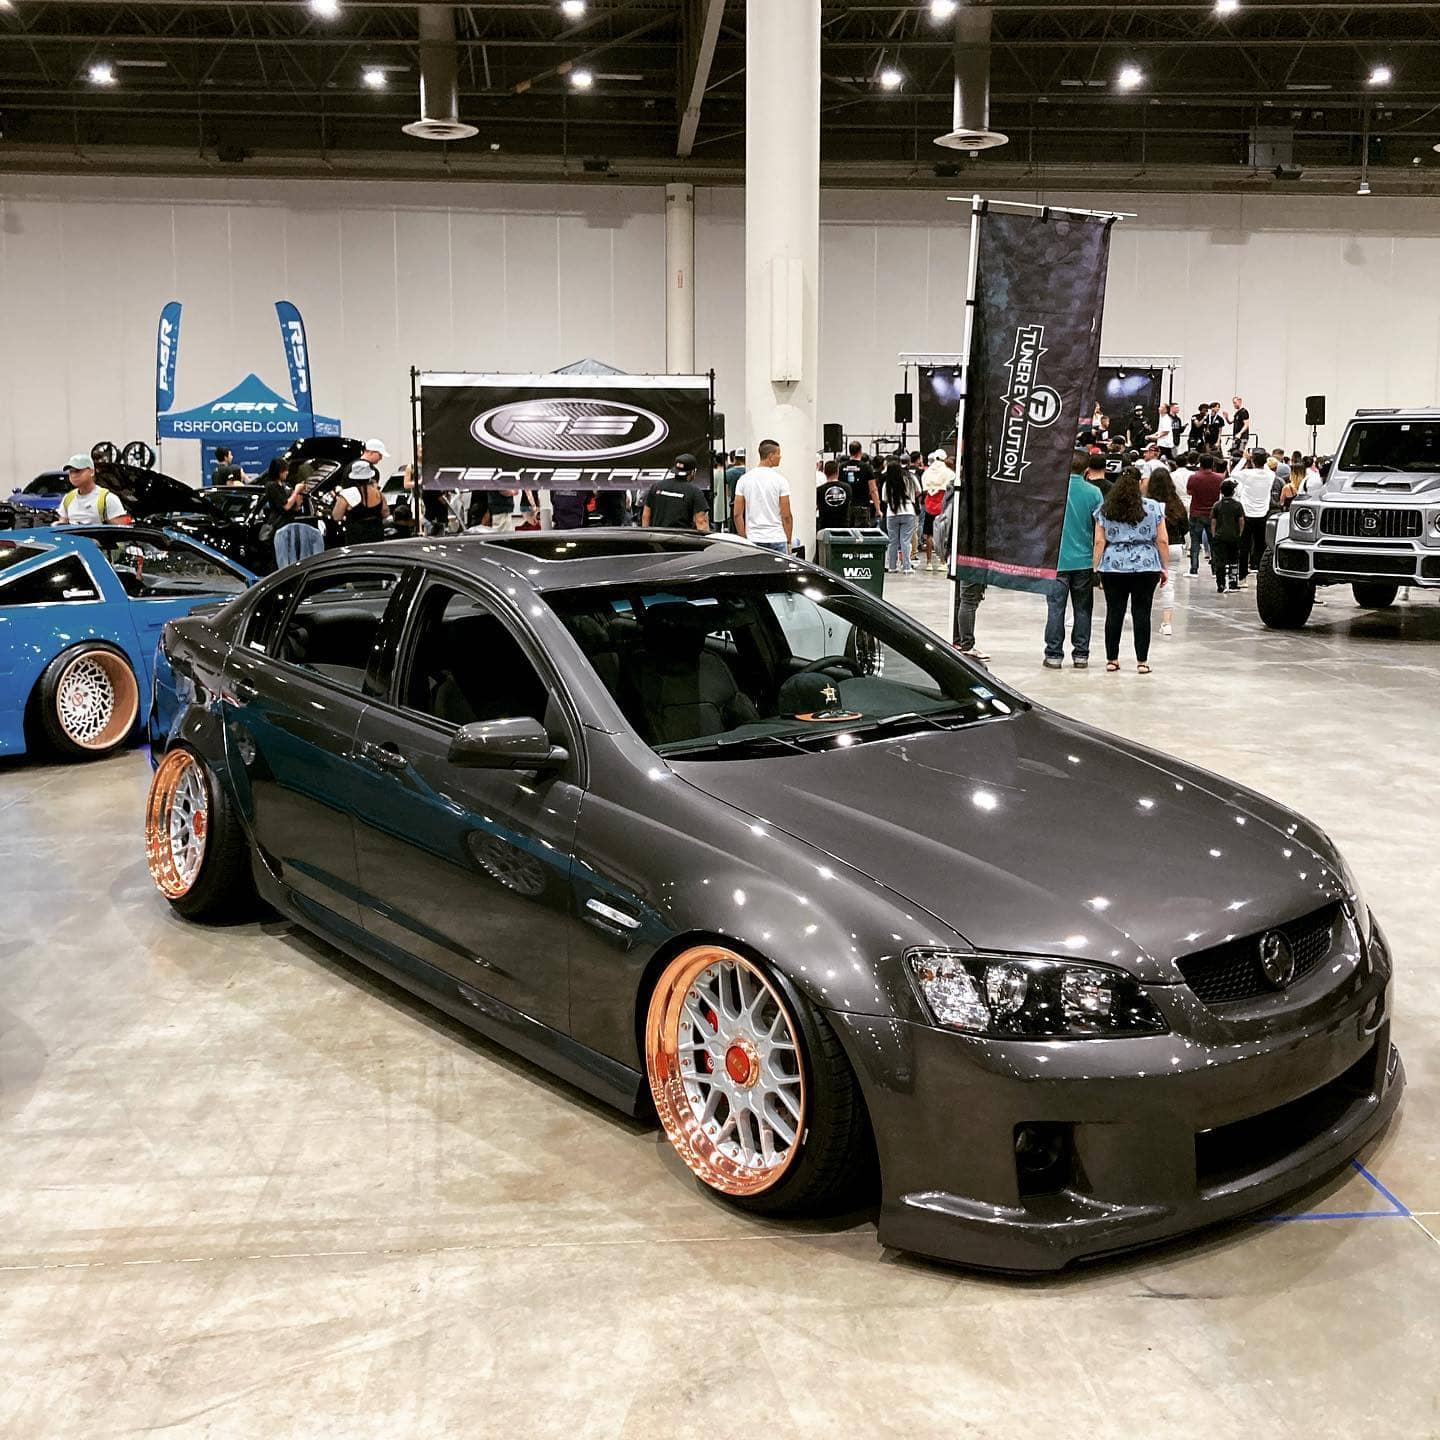 Slammed Holden Commodore with air suspension